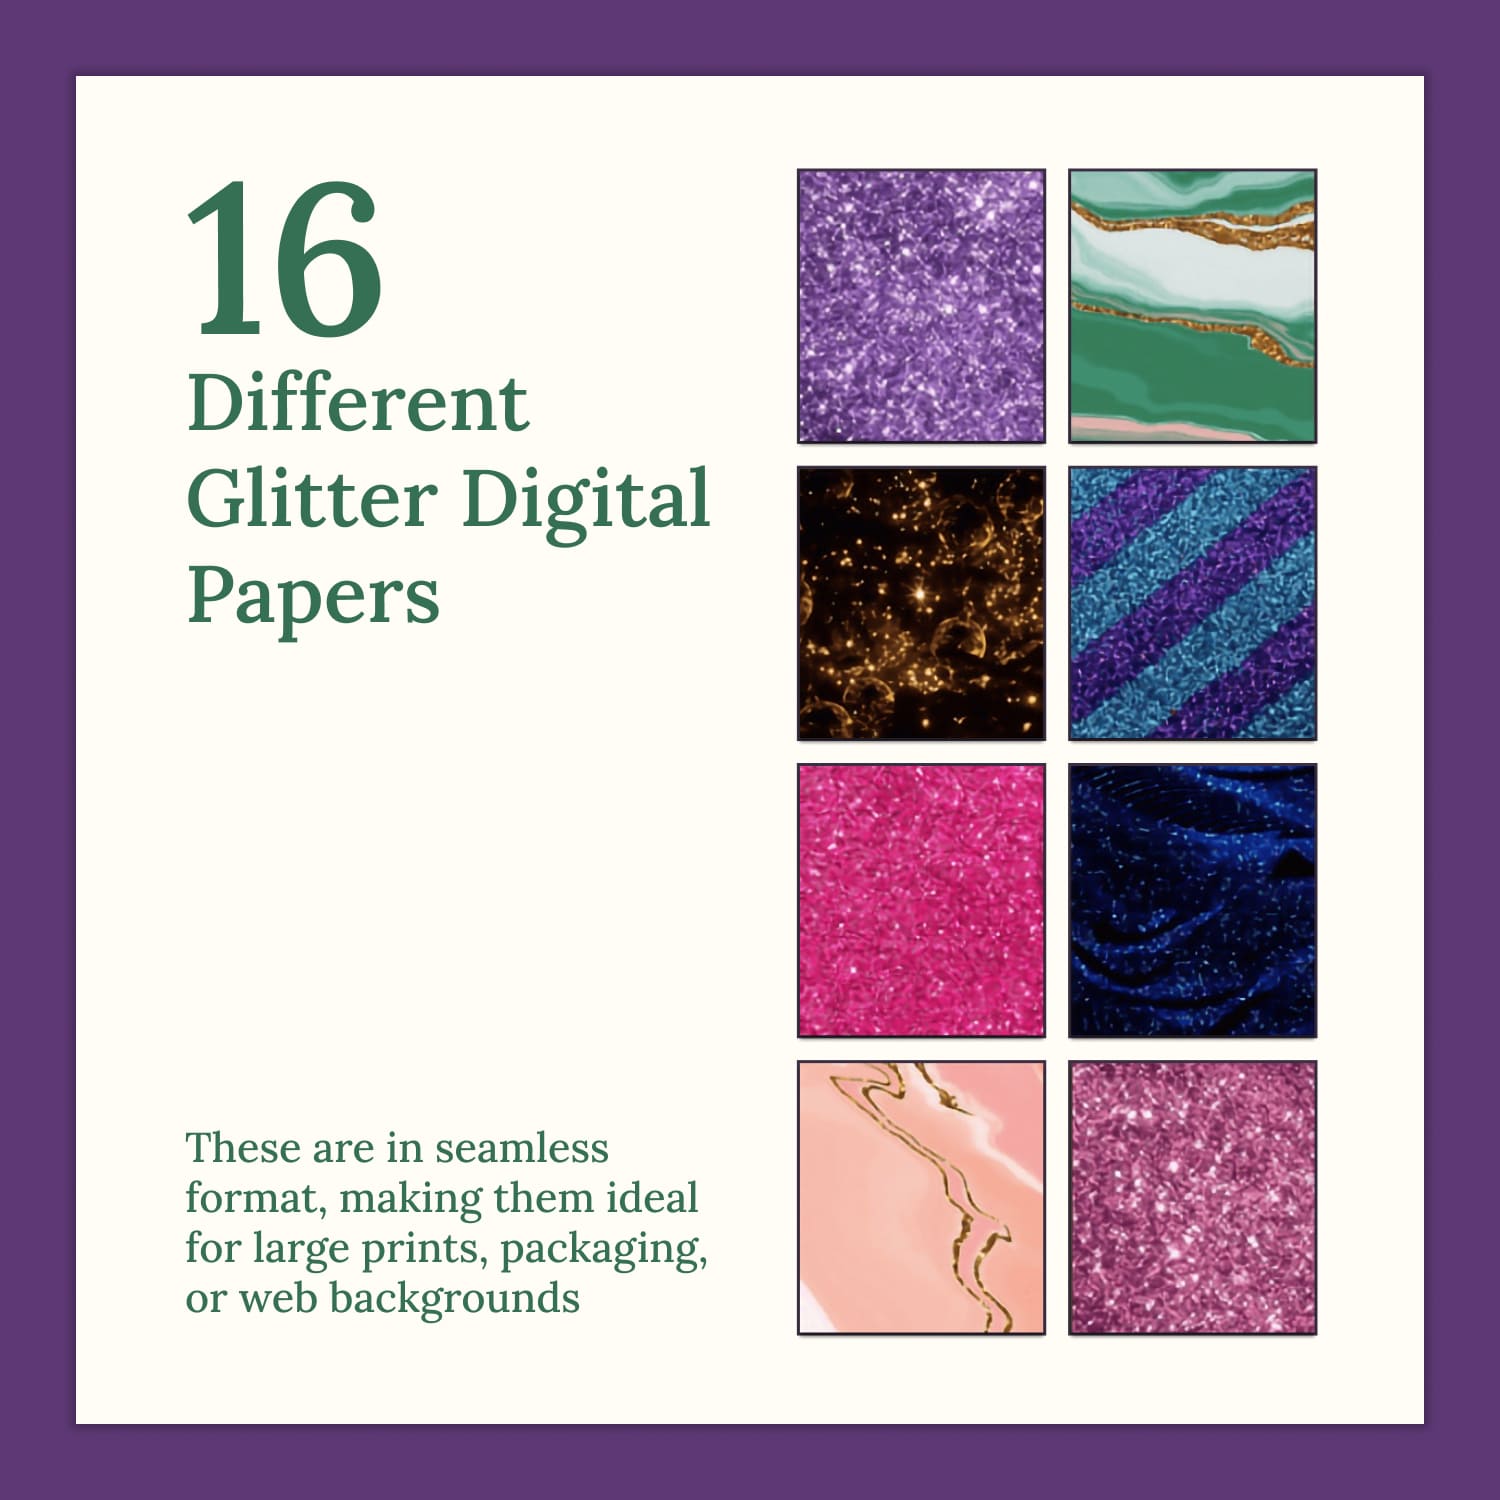 16 Different Glitter Digital Papers.